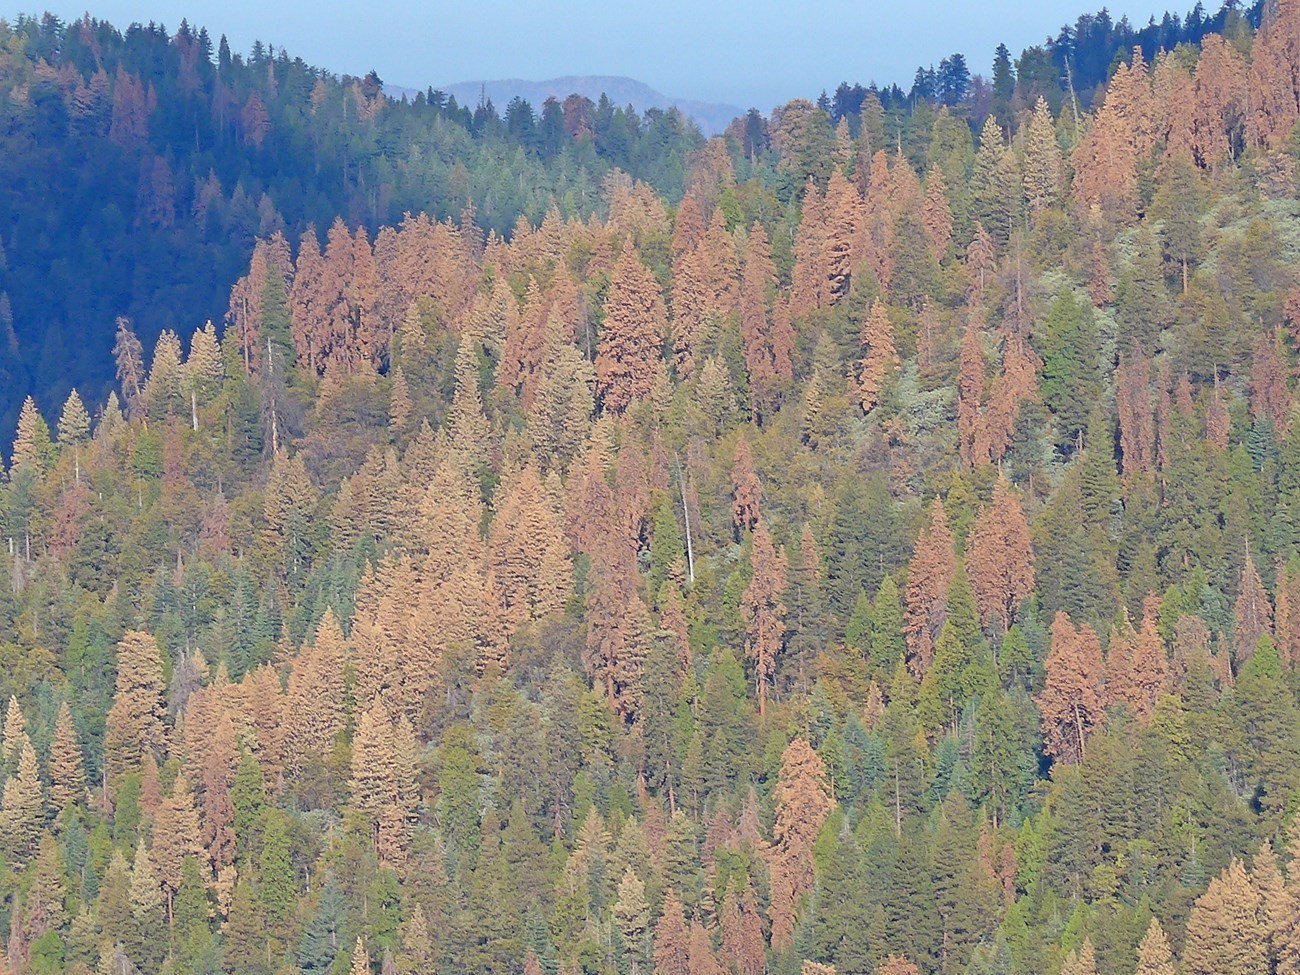 Many trees with brown needles, dead from a drought, mixed with live trees on a mountain slope.